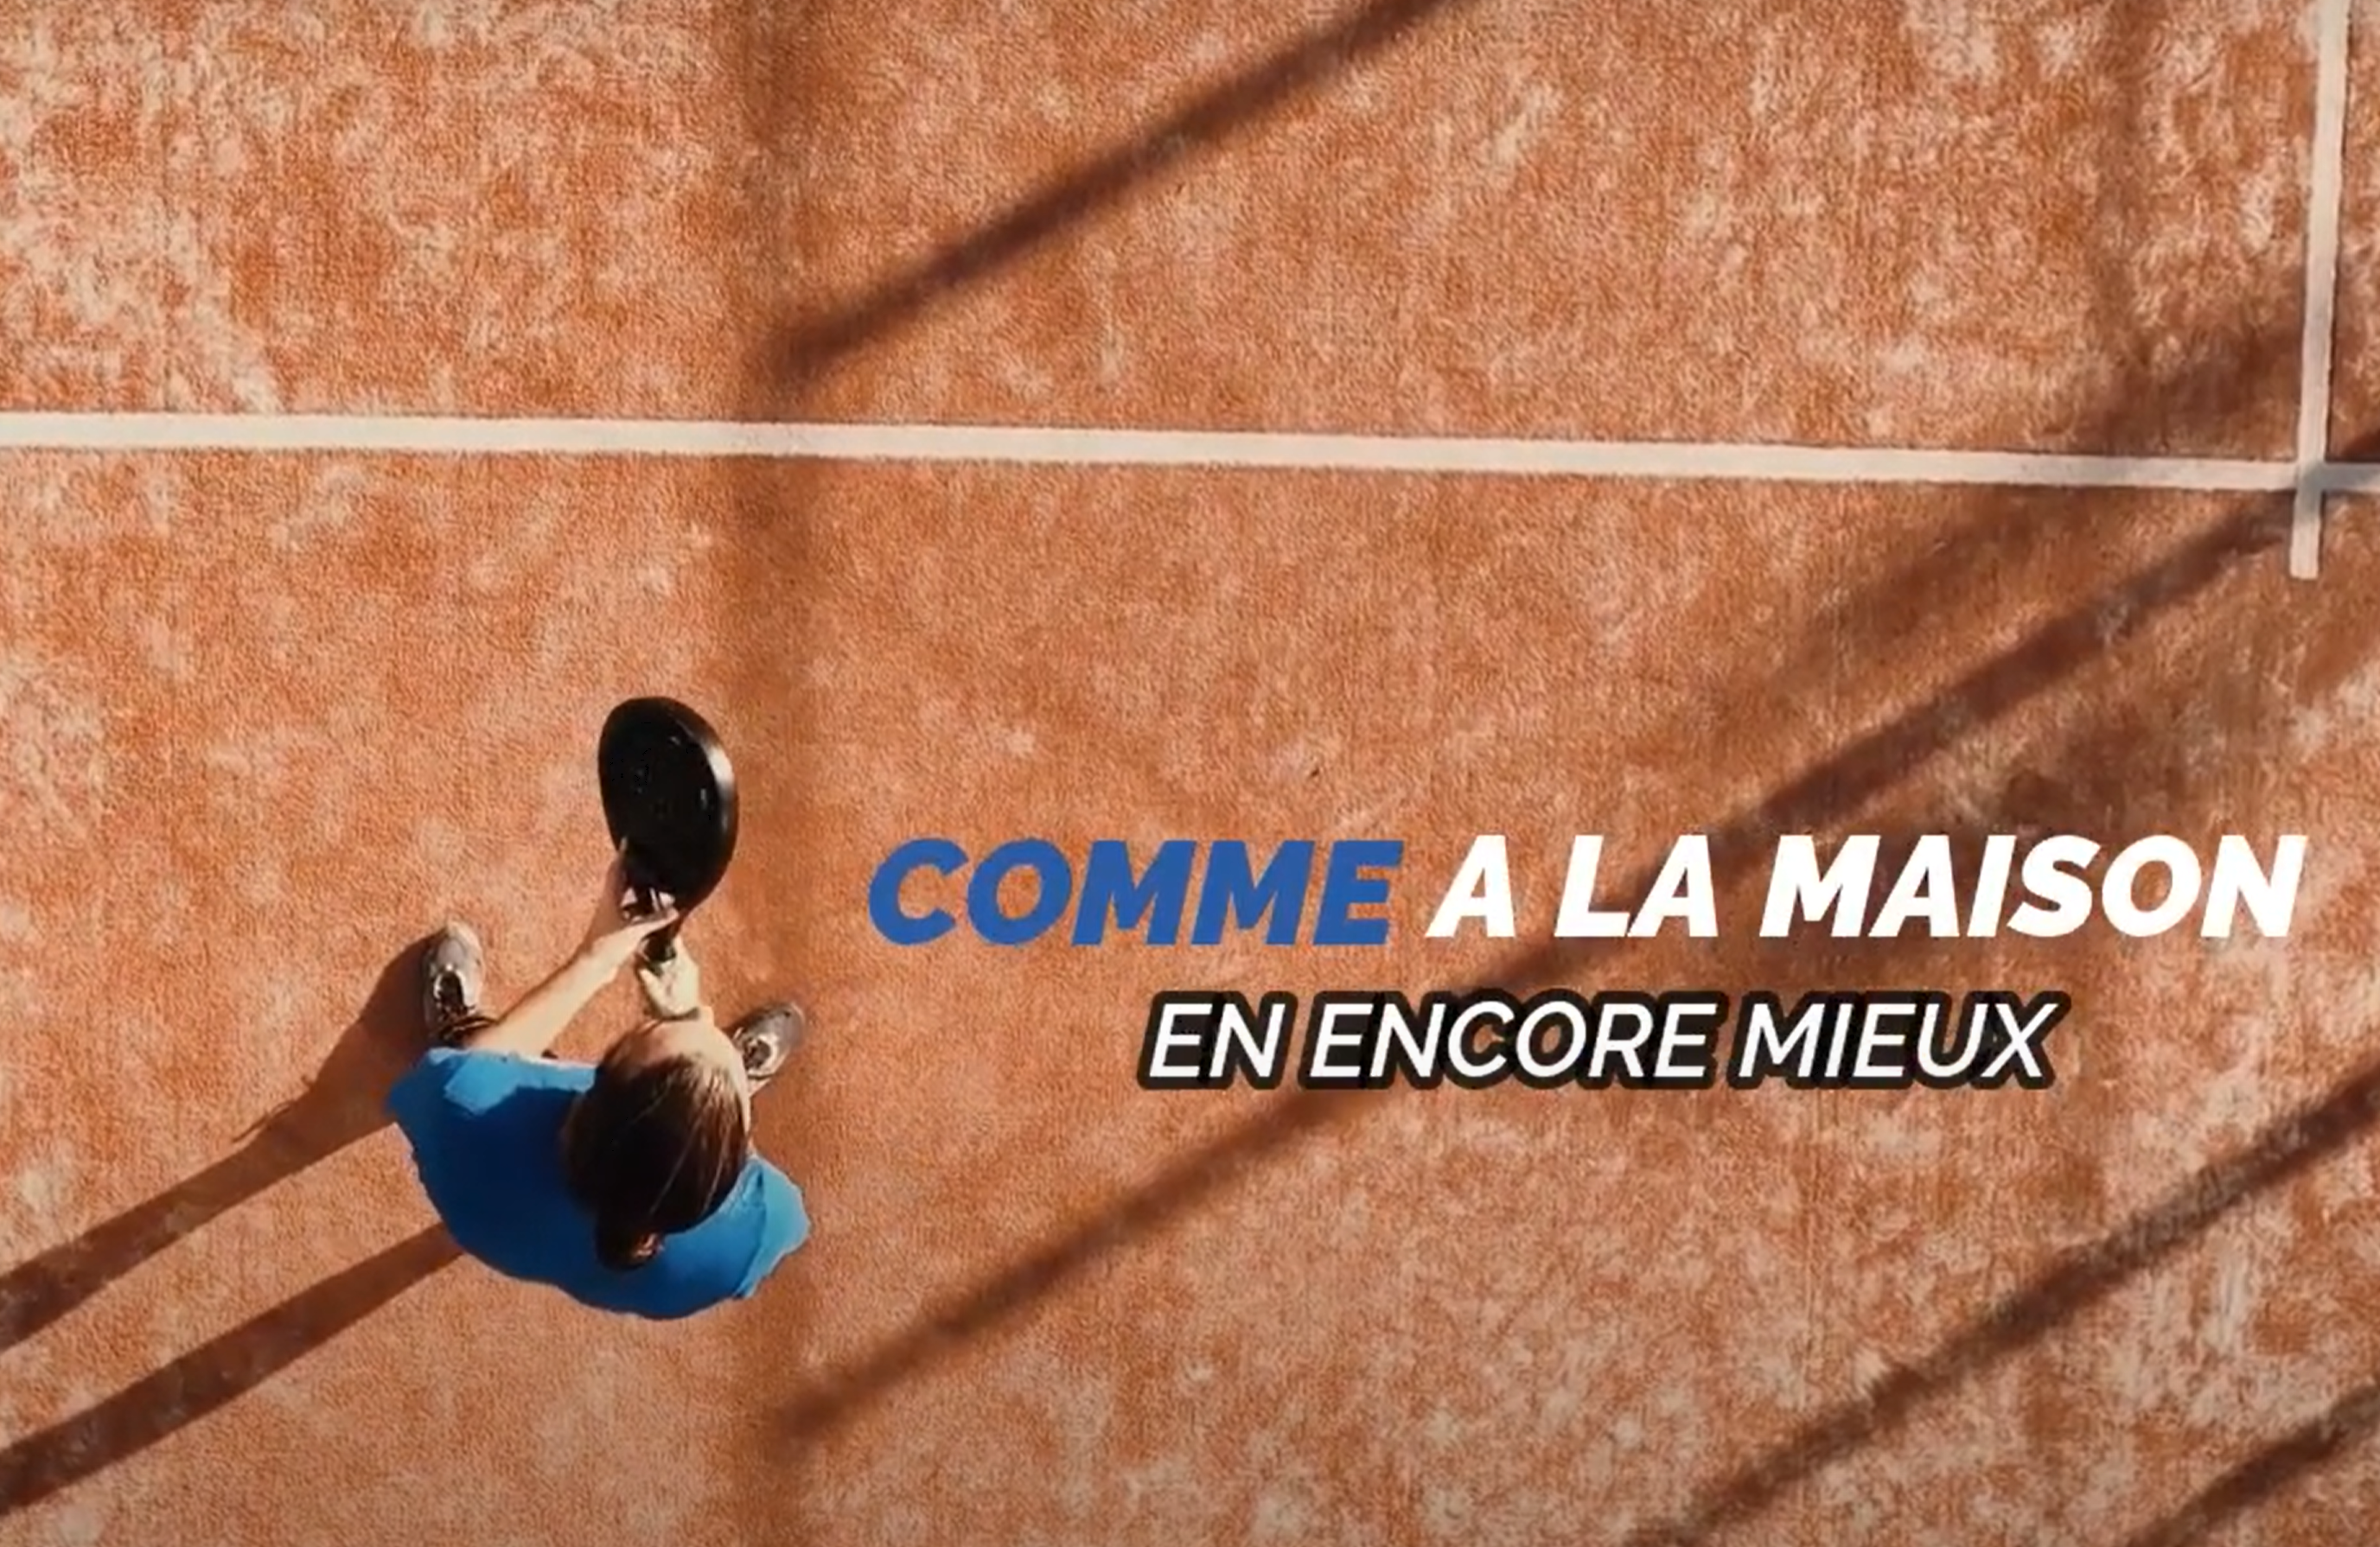 Live a stay padel in Tenerife like at home